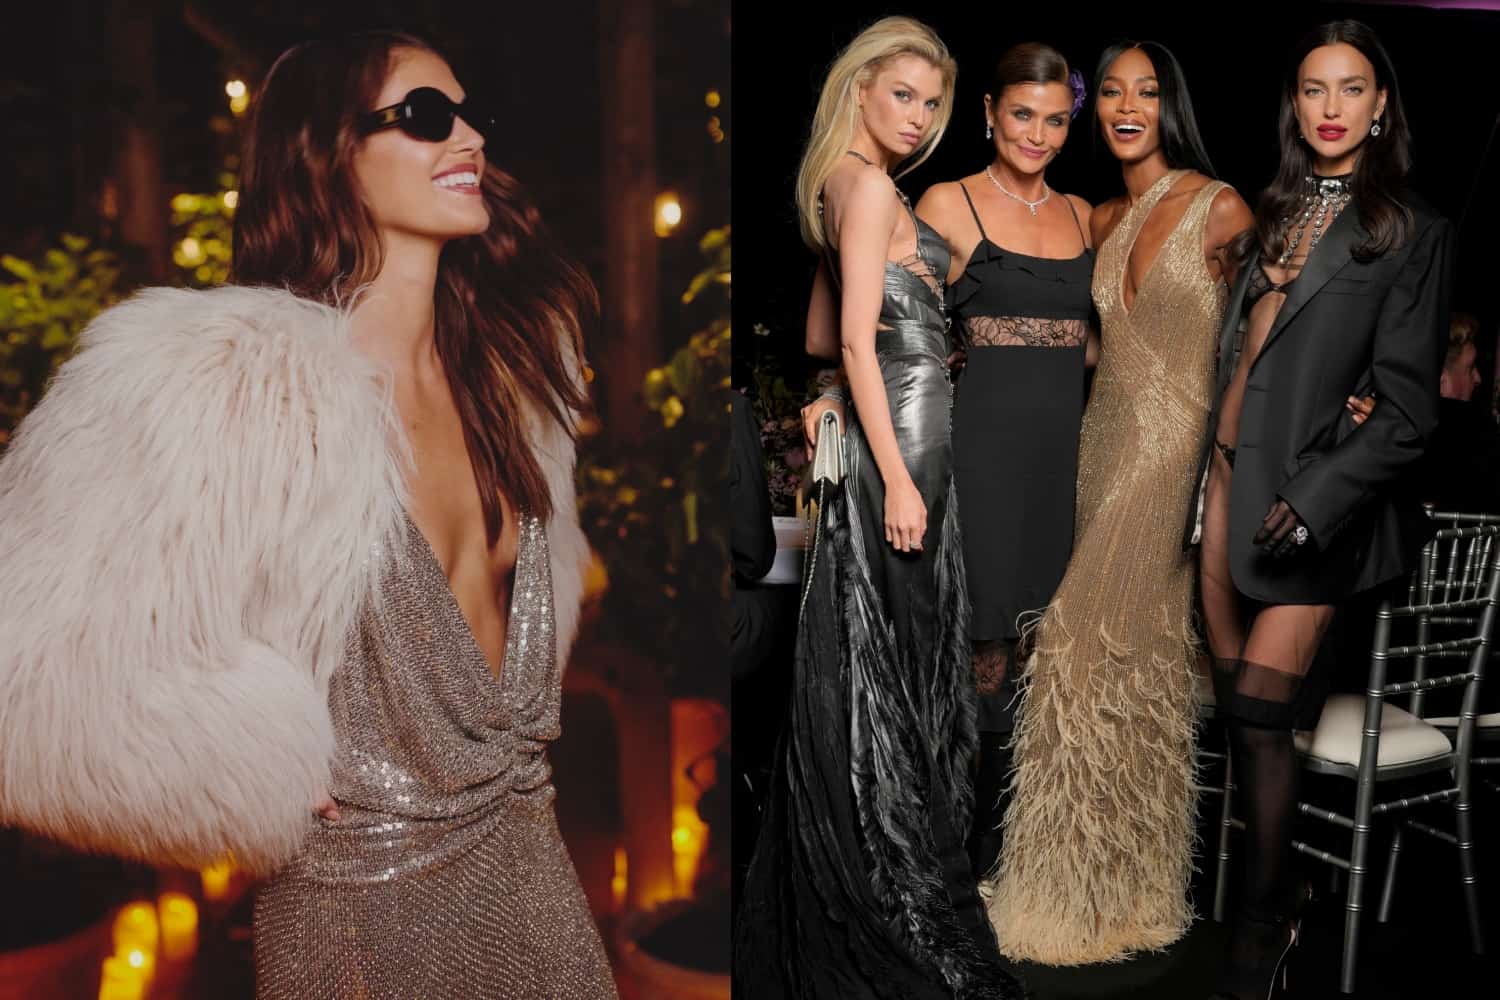 naomi-campbell’s-birthday-bash,-out-to-dinner-with-celine,-british-vogue-&-chopard-raise-a-glass-to-cannes,-halle-bailey-covers-glamour,-and-more!